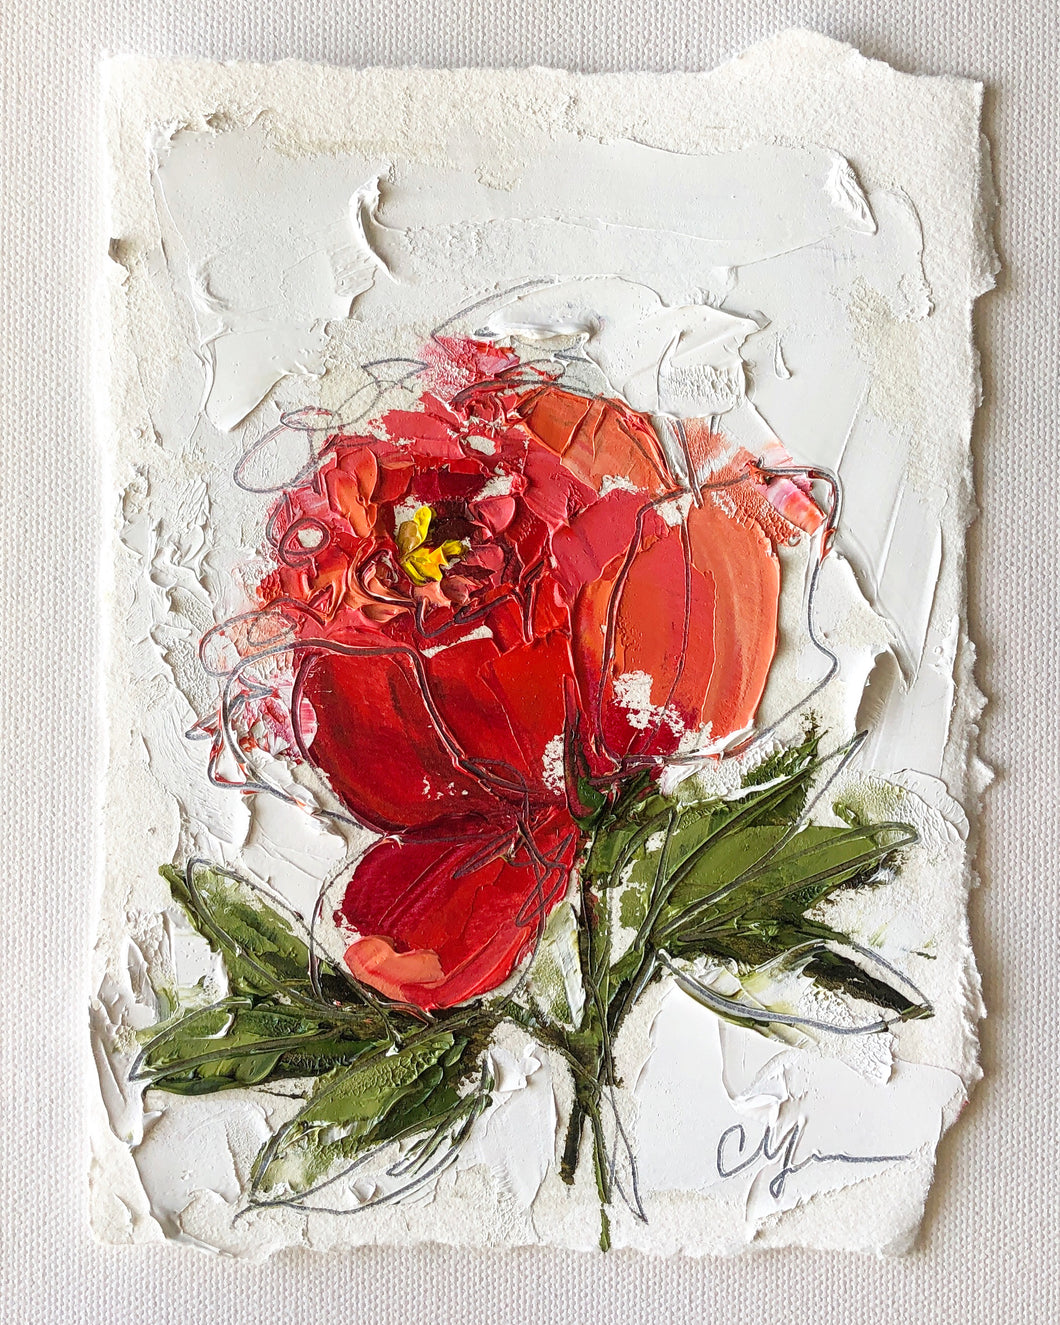 “Little Red Peony” - 7x5 Oil on Paper